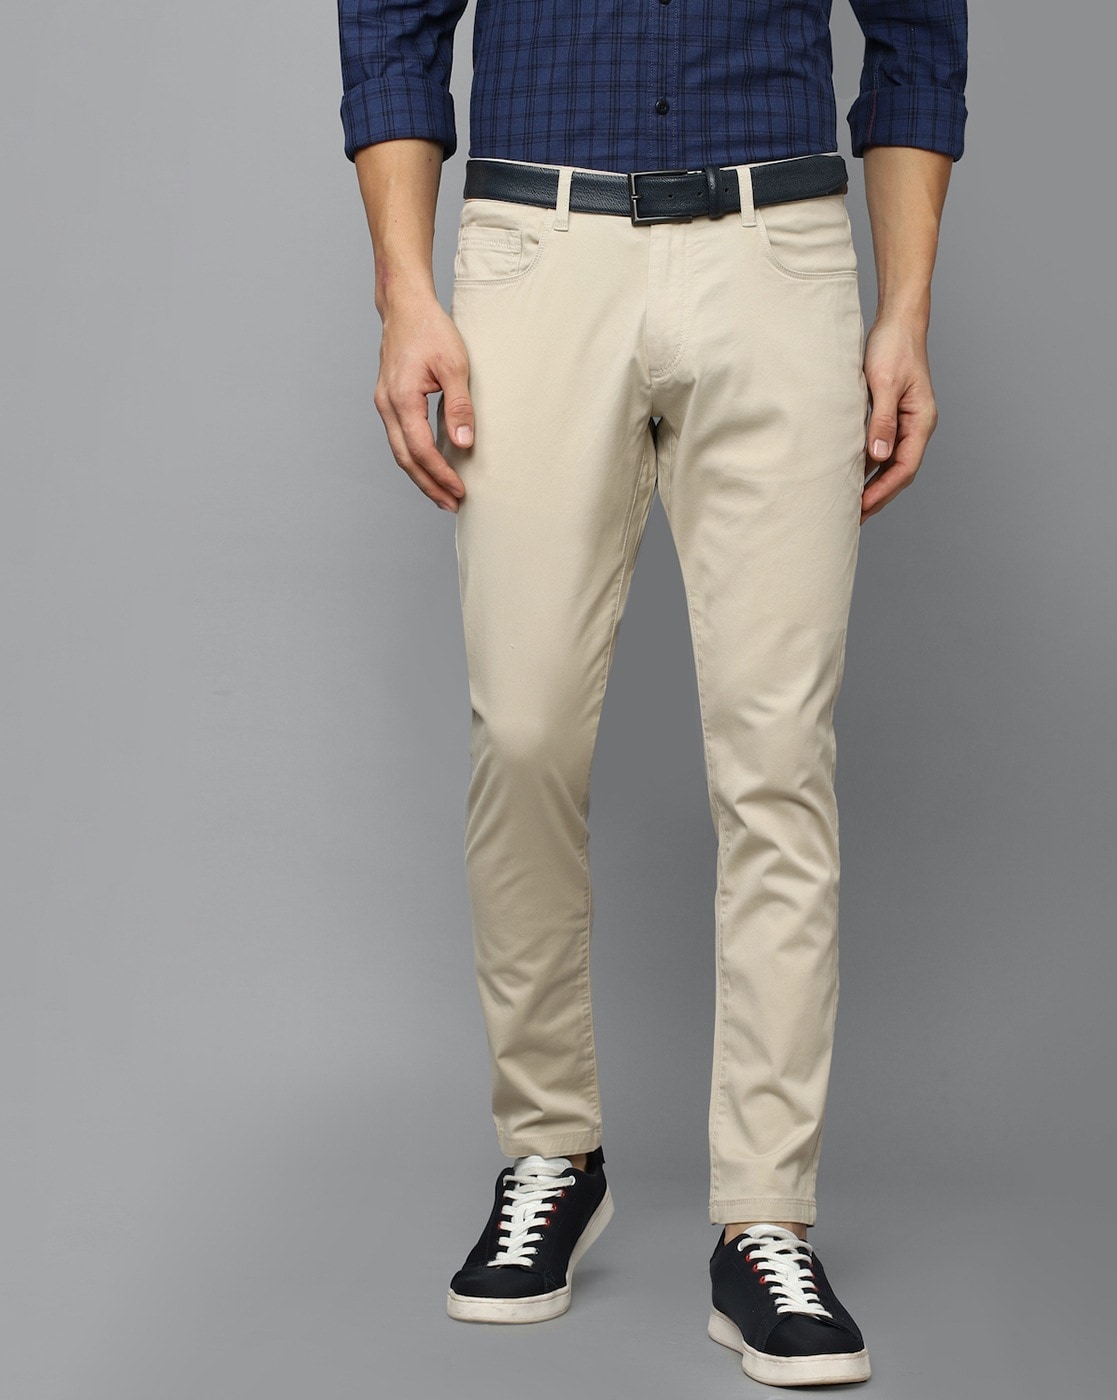 Buy Cream Trousers & Pants for Men by LOUIS PHILIPPE Online